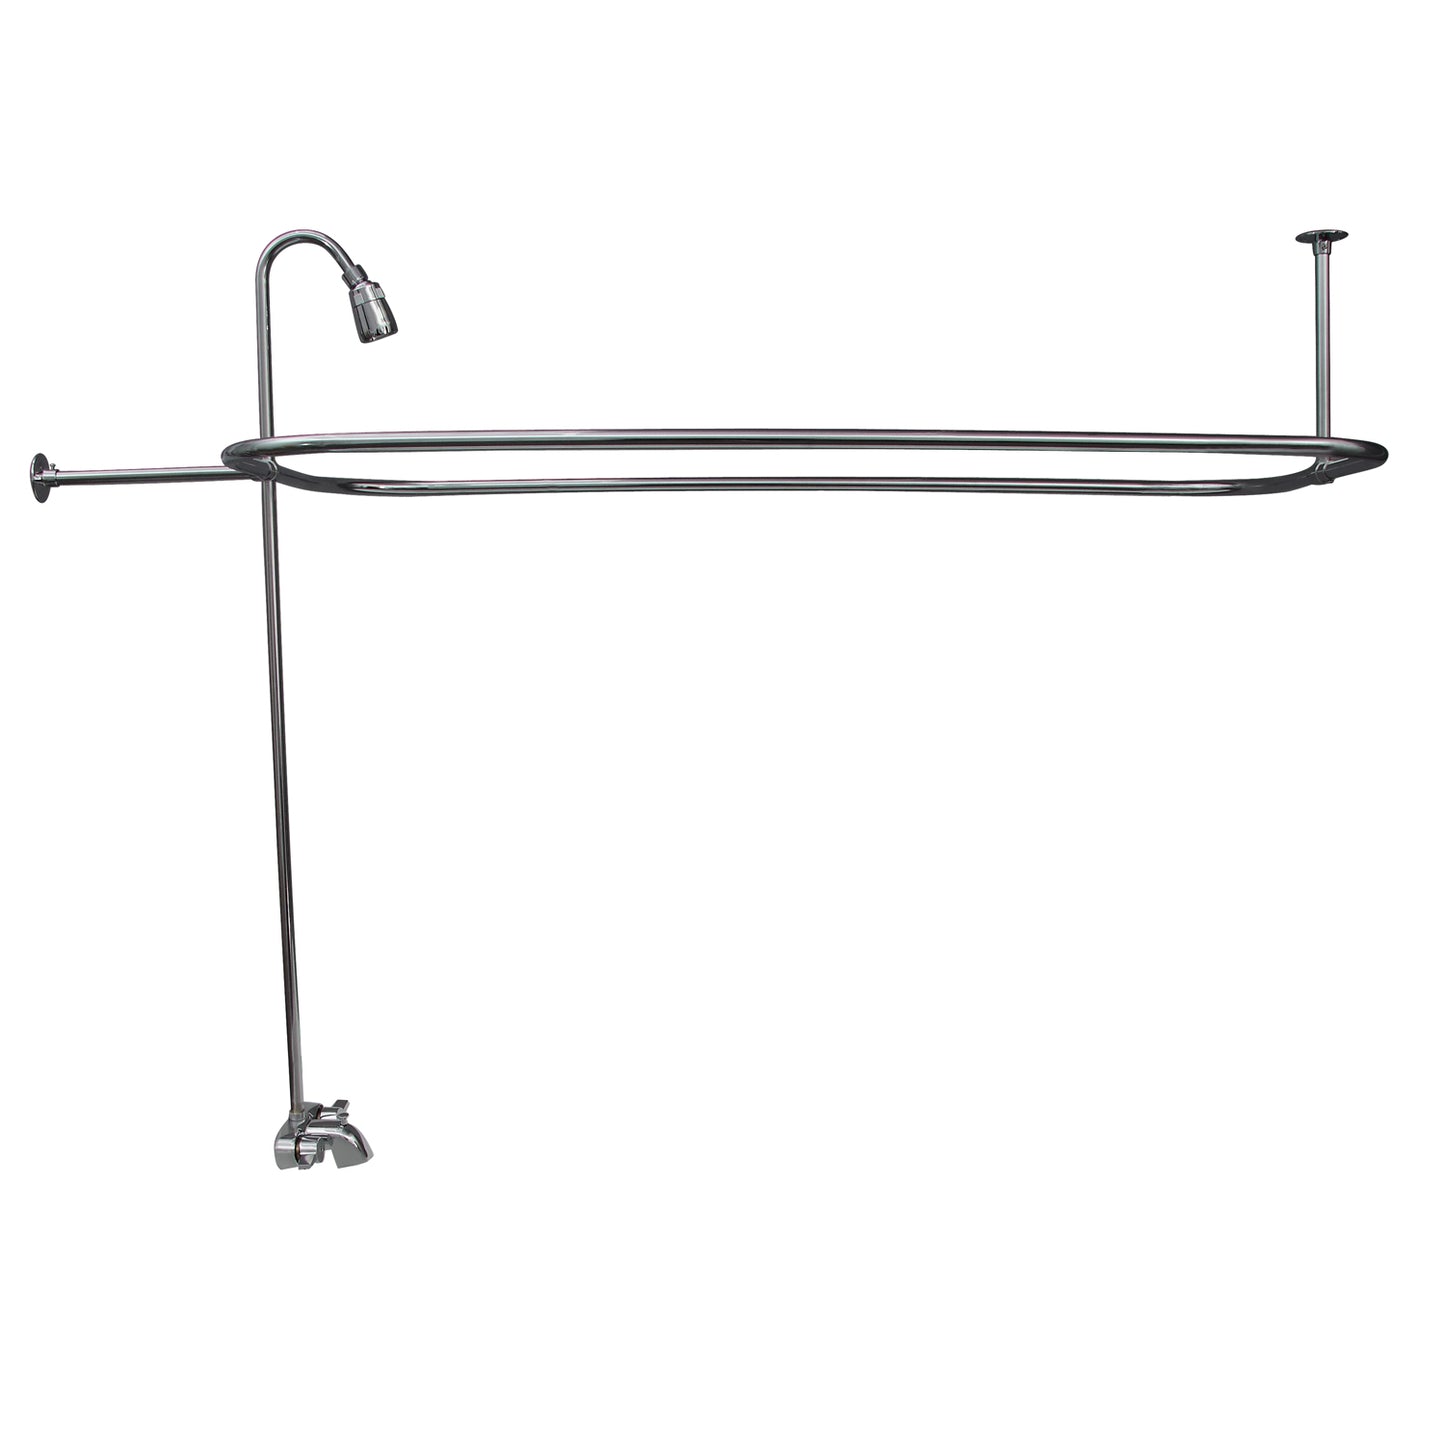 Complete Basic Tub Faucet & Shower Kit with 54" x 24" Rod, Shower Head, Chrome